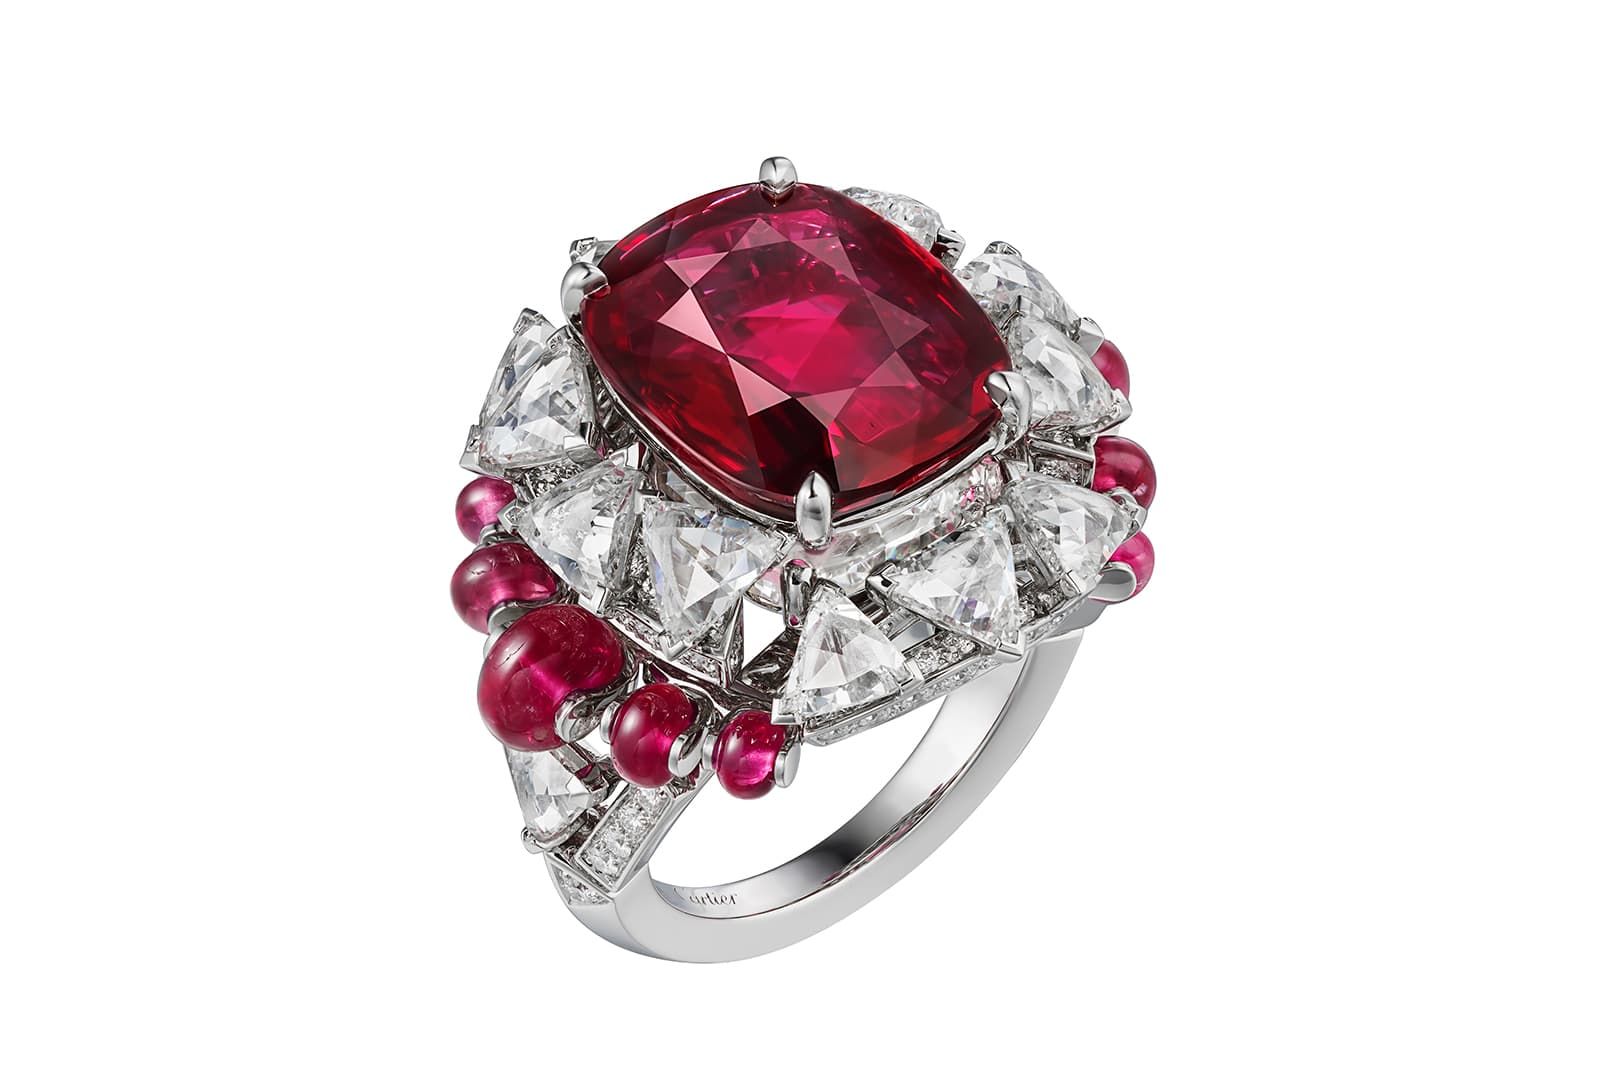 The Cartier Phaan ring from the Sixième Sens par Cartier High Jewellery Collection with an 8.20 carat ruby and a 4.01 carat rose-cut diamond set directly beneath